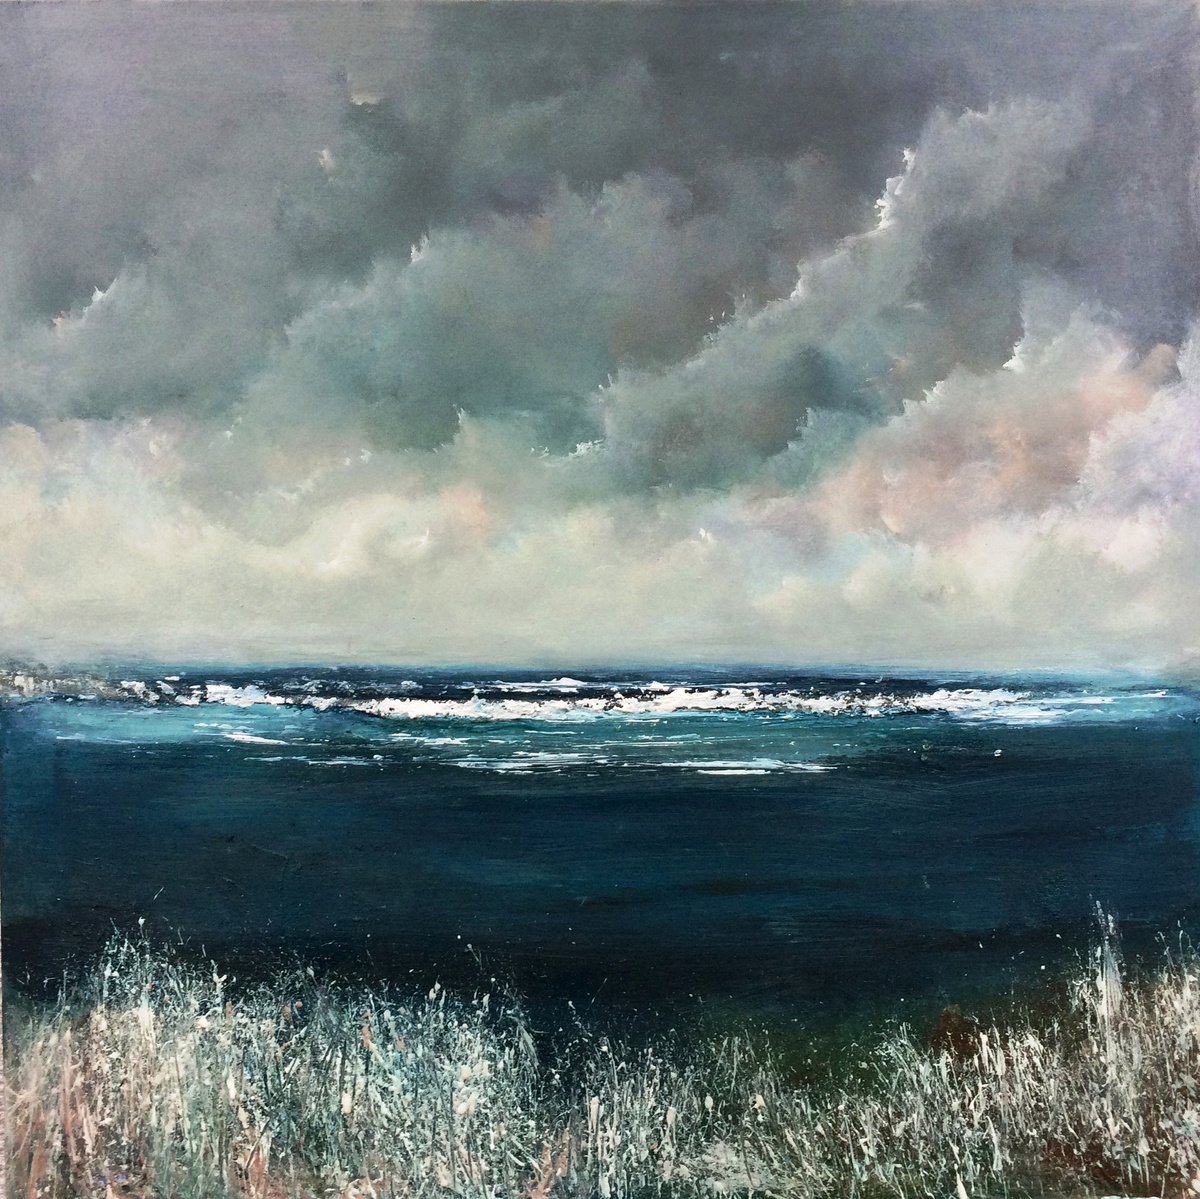 Painting acrylic on canvas landscape sea and sky Artfinder